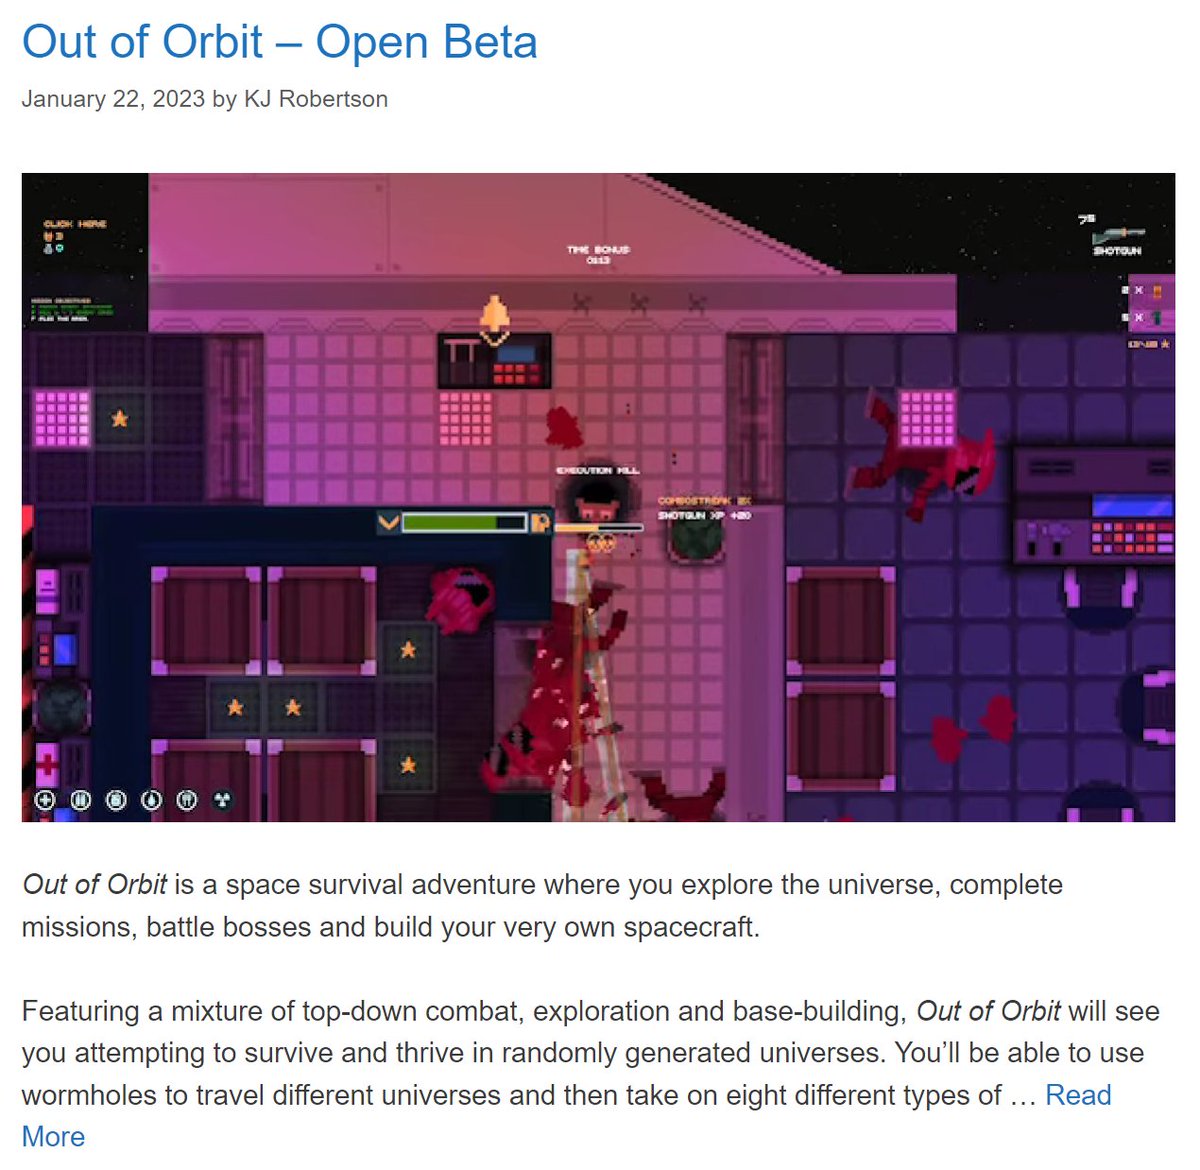 Thanks! alphabetagamer.com for featuring Out of Orbit on your website!

I need more beta testers!
Interested?

Sign up below!
store.steampowered.com/app/1859990/Ou…

#gamedev #indiedev #indiegame #indiegames #indiegaming #betatesting #betatesters #testmyapp #apptesting #mobileapptesting